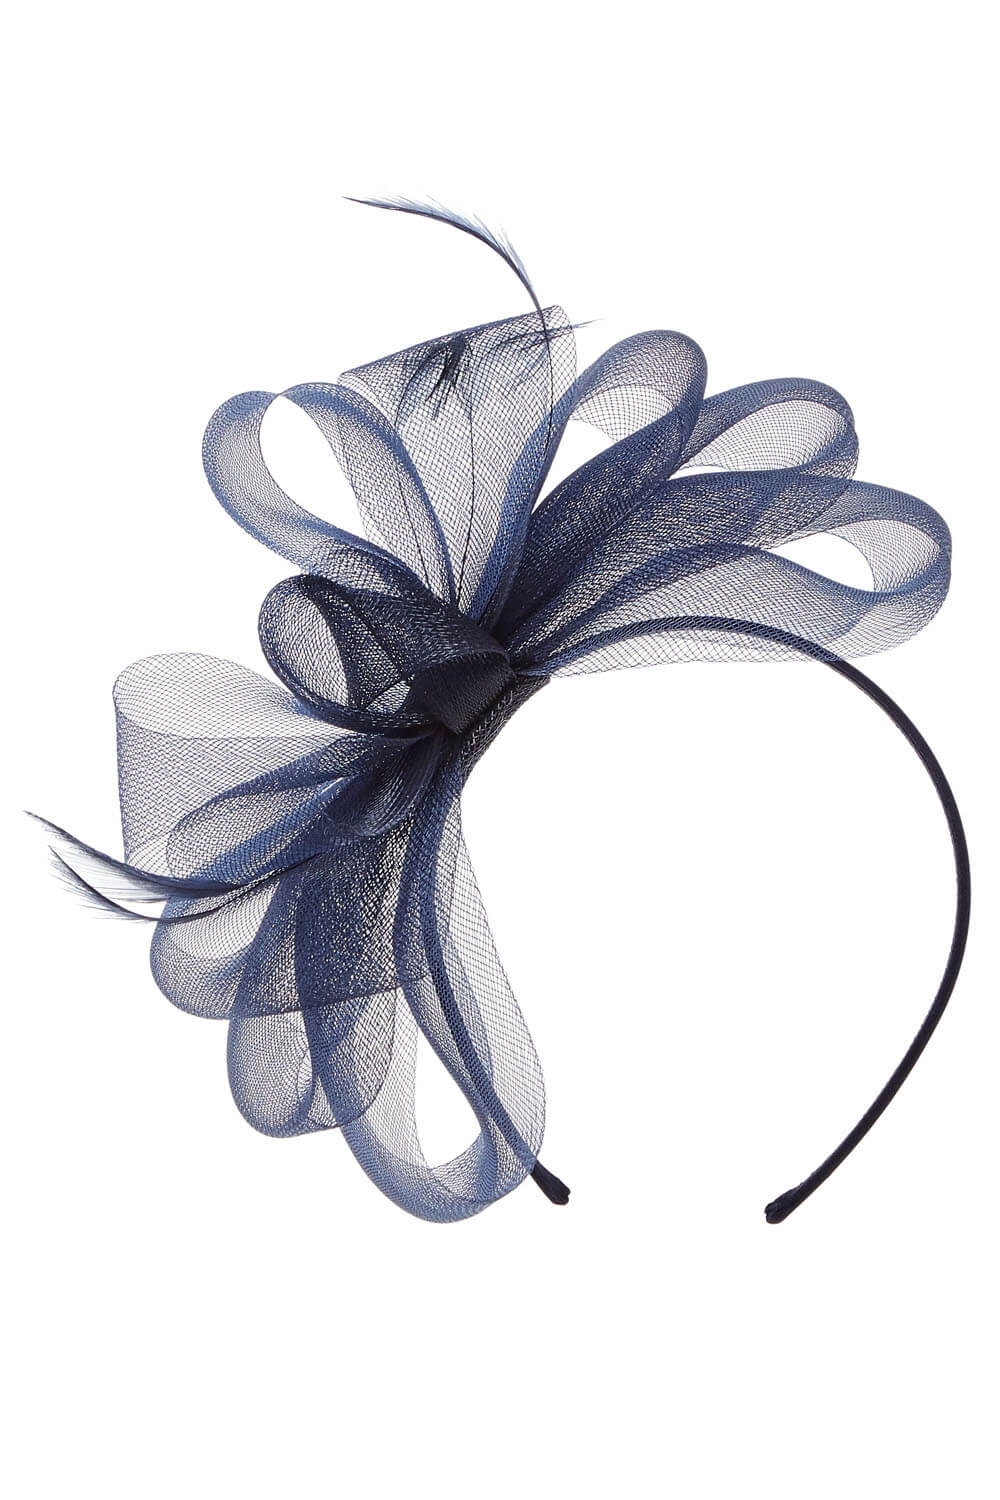 Bow and Feather Band Fascinator in Navy - Roman Originals UK